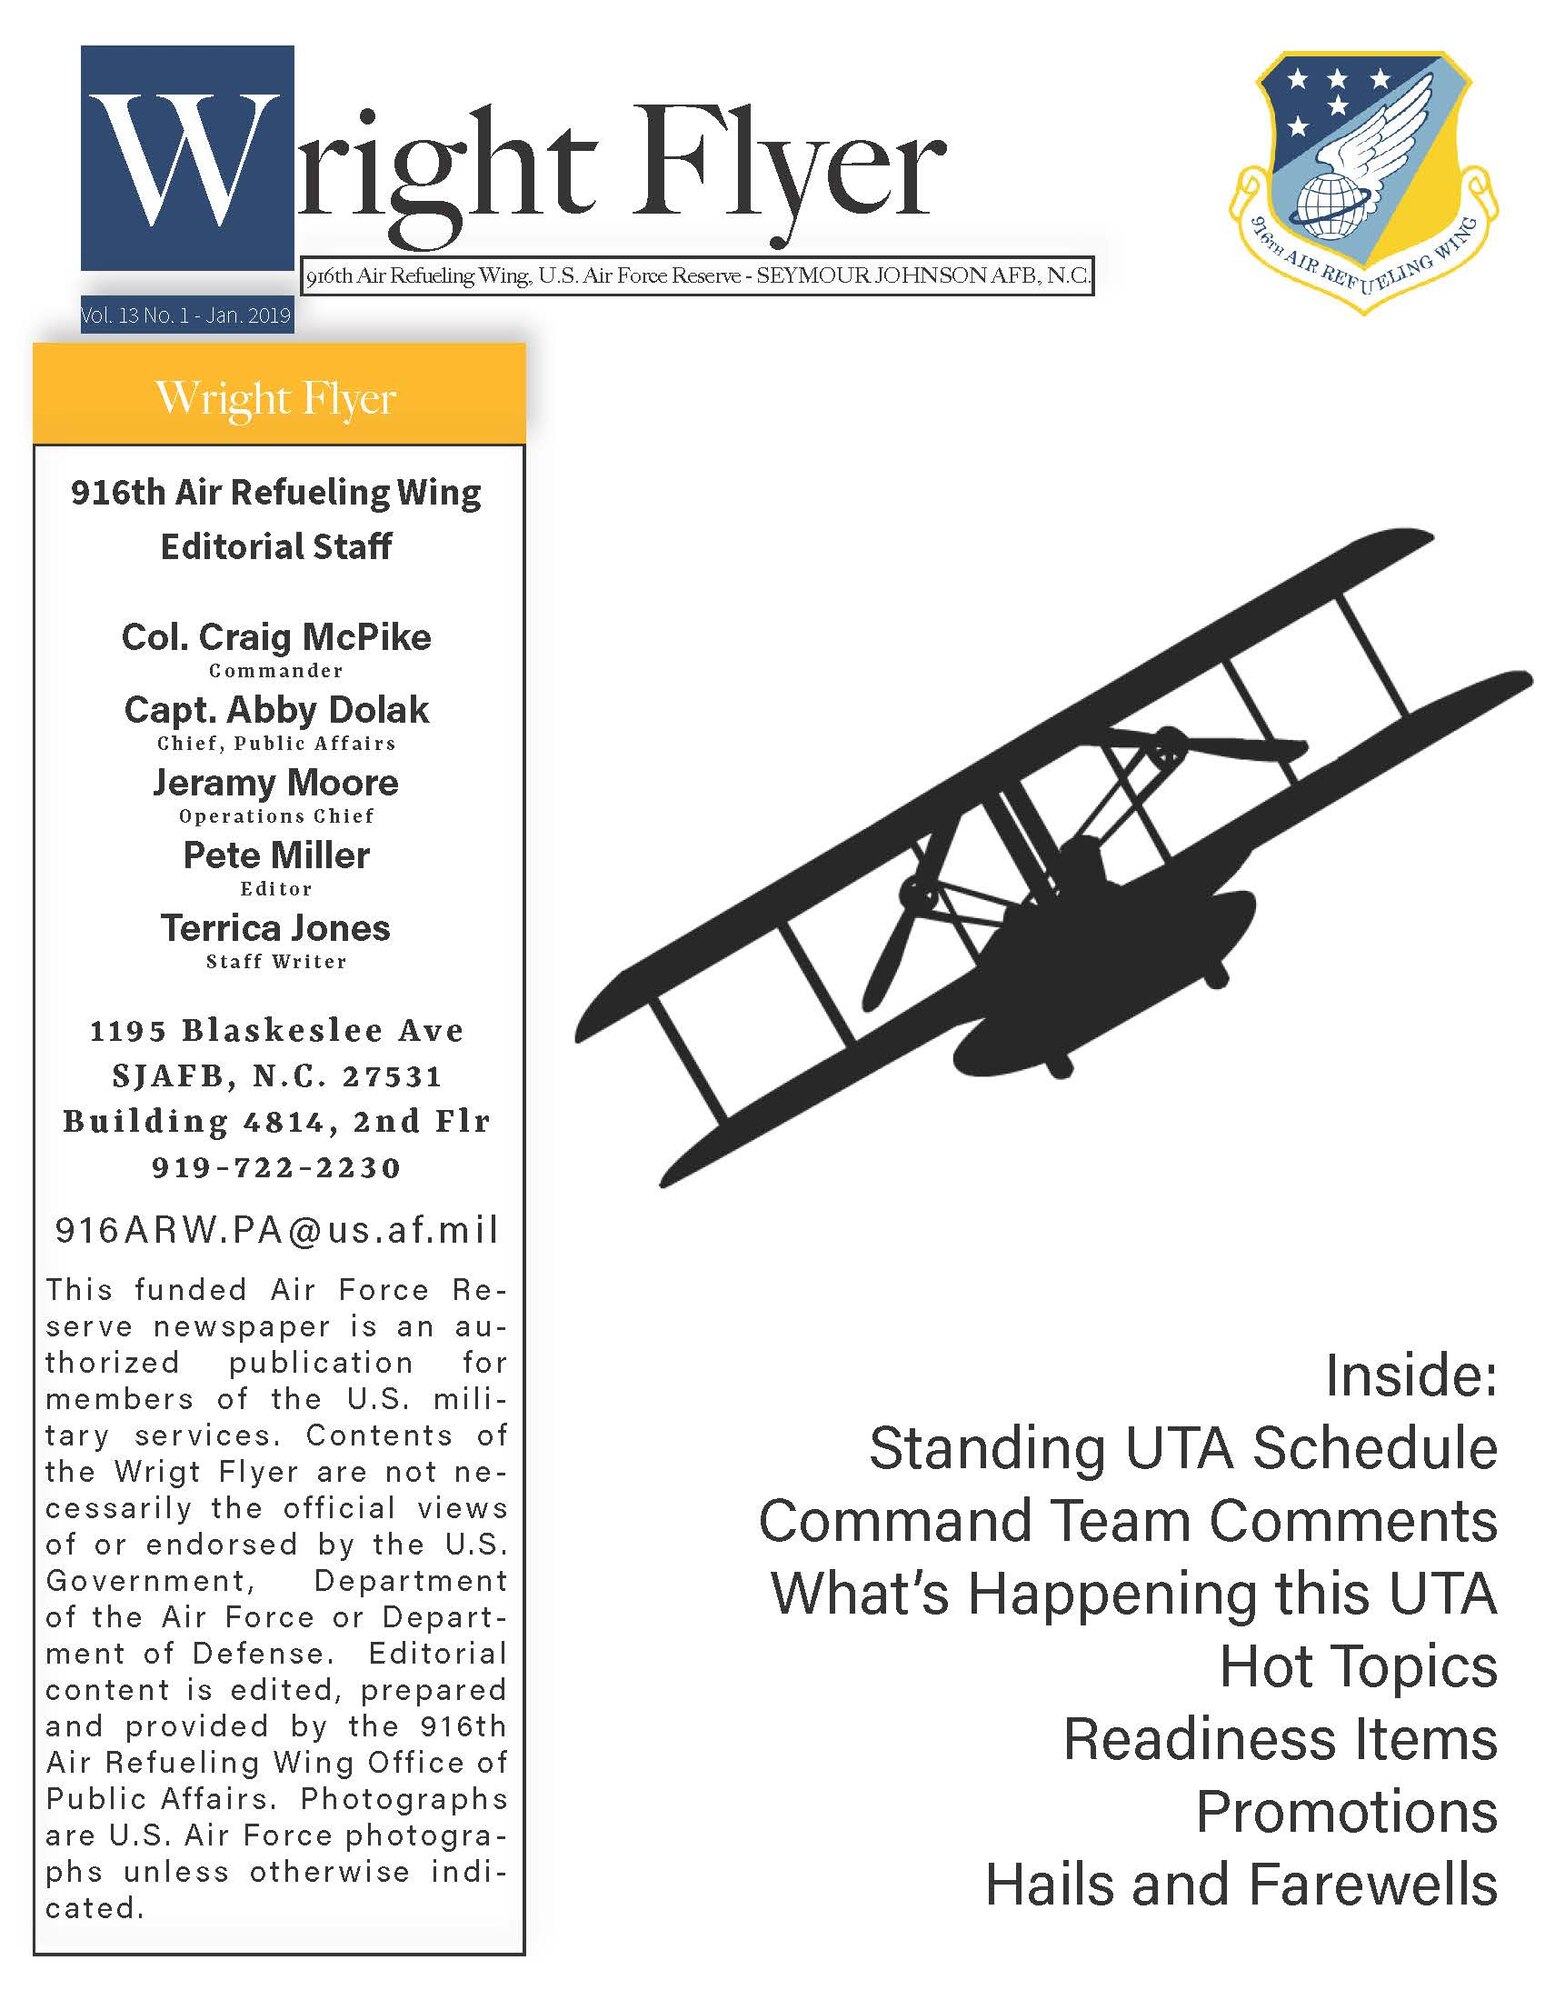 The official newsletter of the 916th ARW.